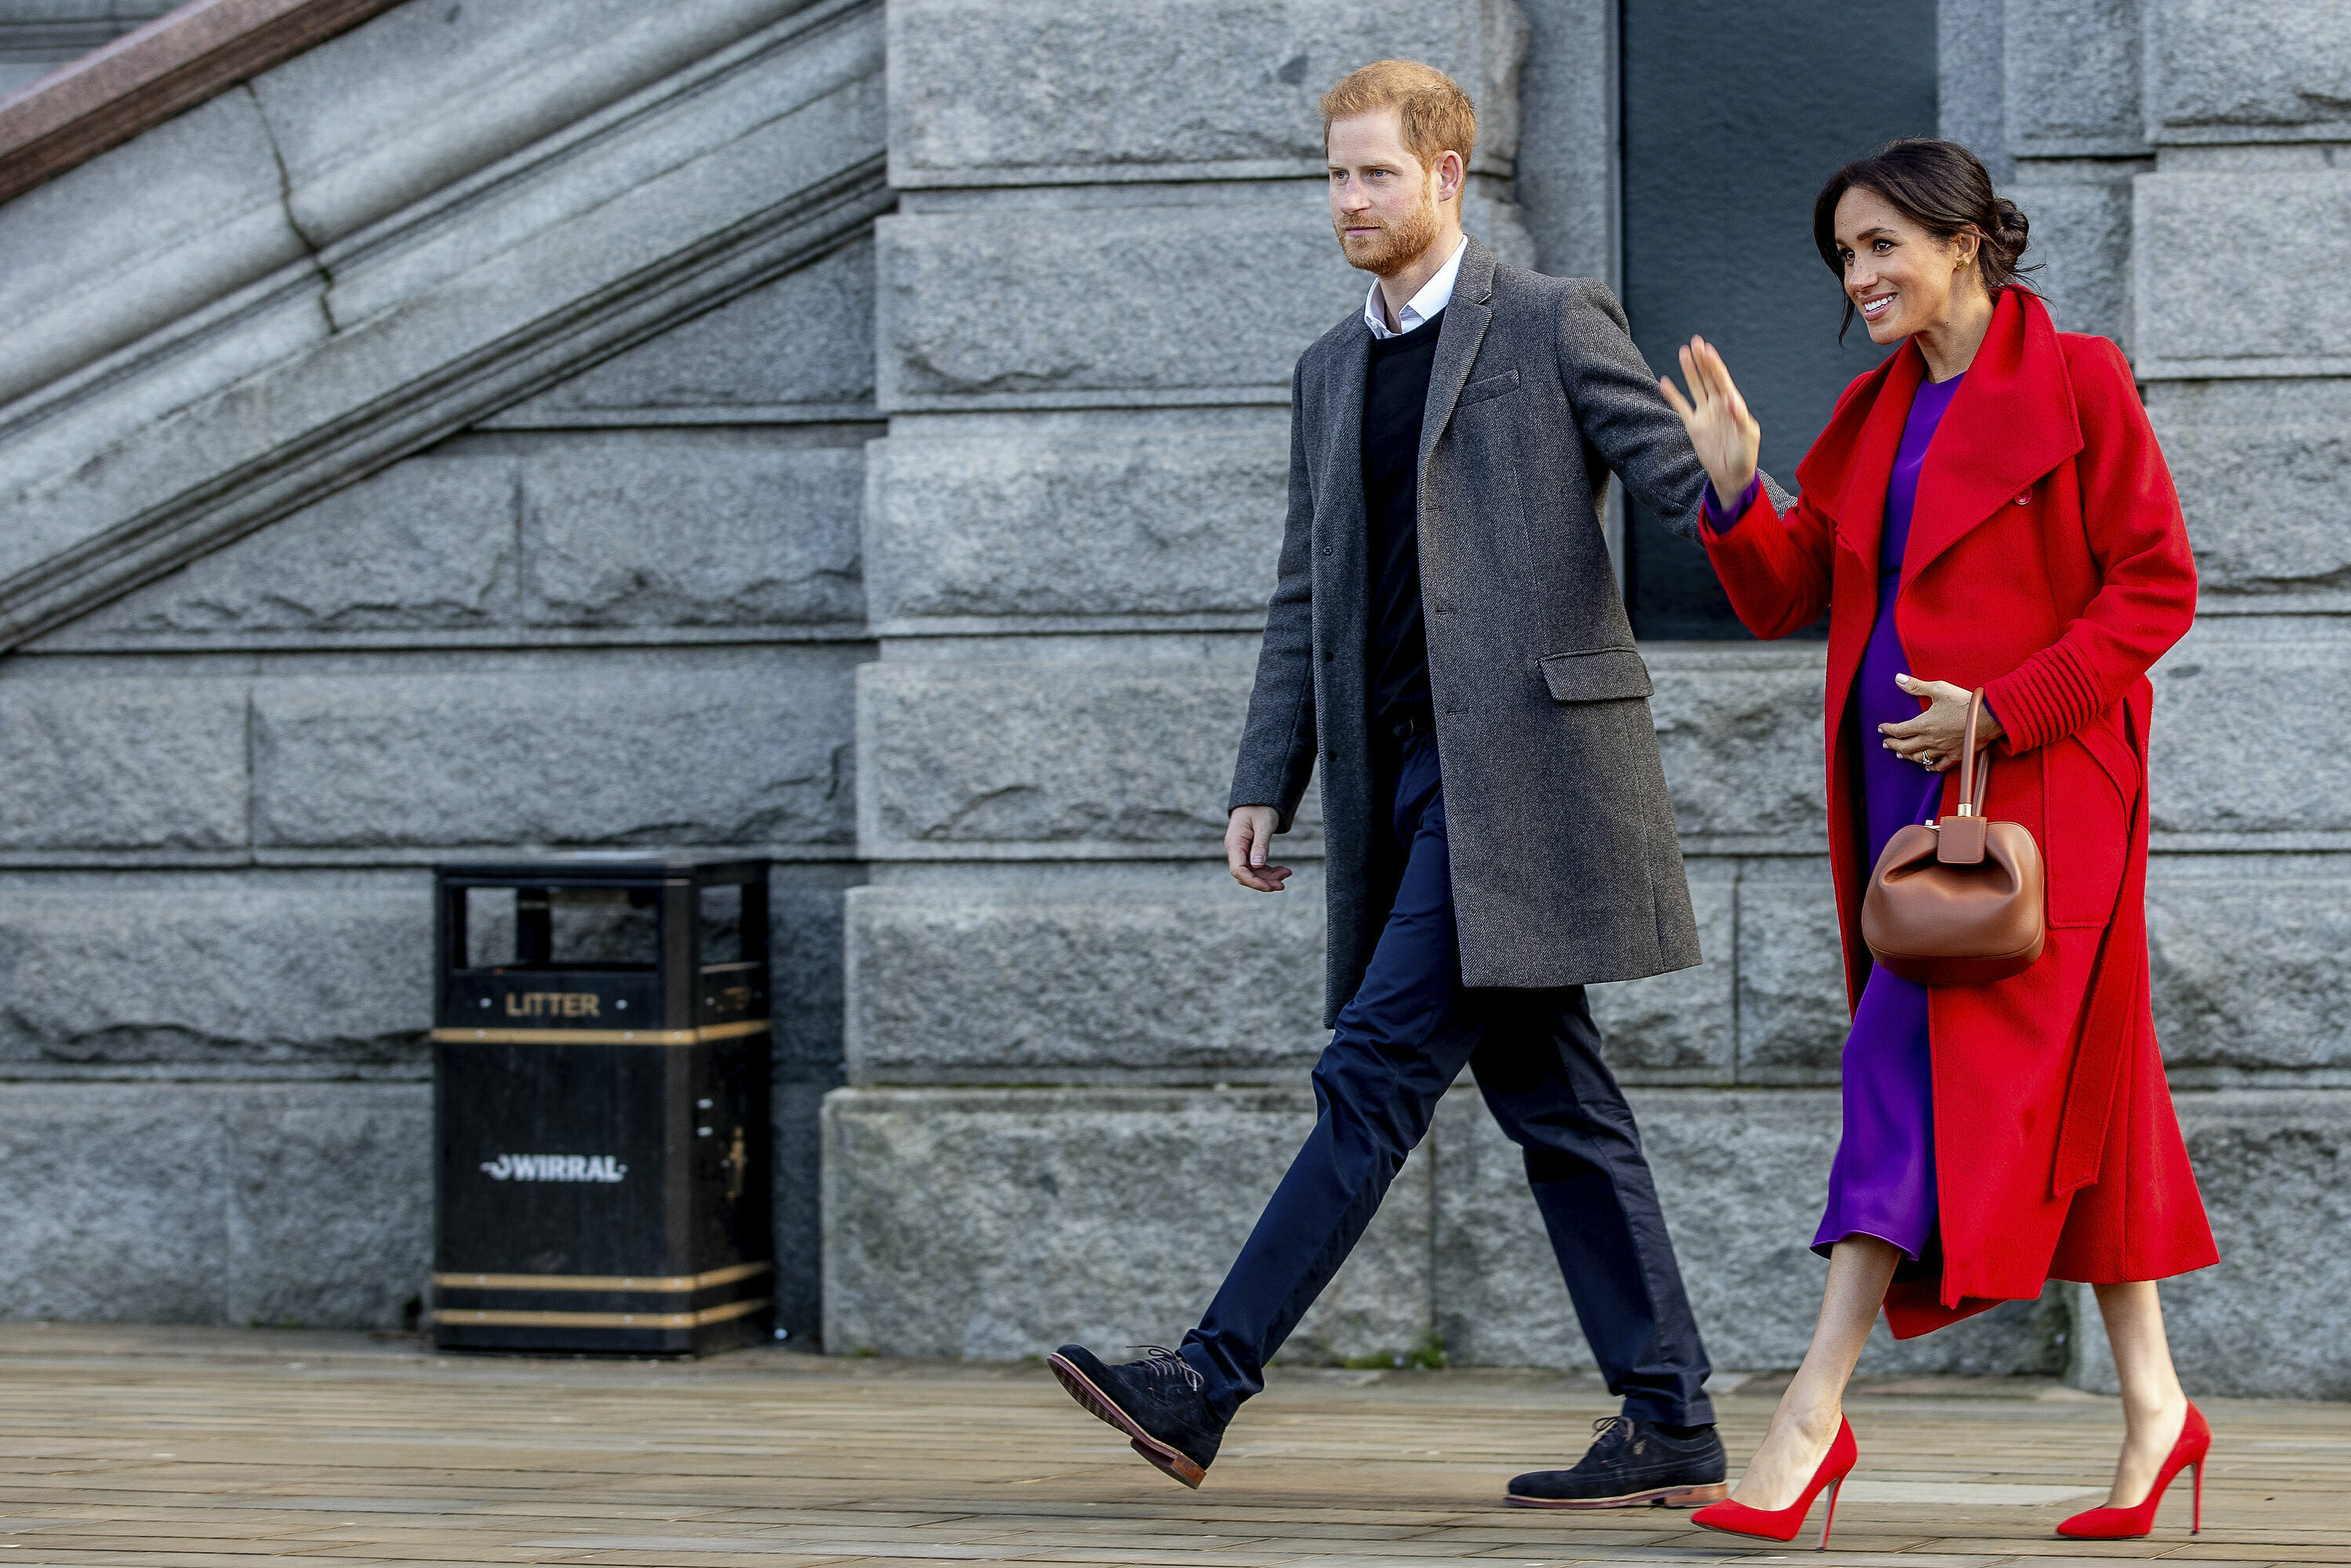 Britain's Prince Harry and Meghan, Duchess of Sussex greet the crowds of people during a visit to Birkenhead, northwest England, Monday Jan. 14, 2019. [Photo: AP]